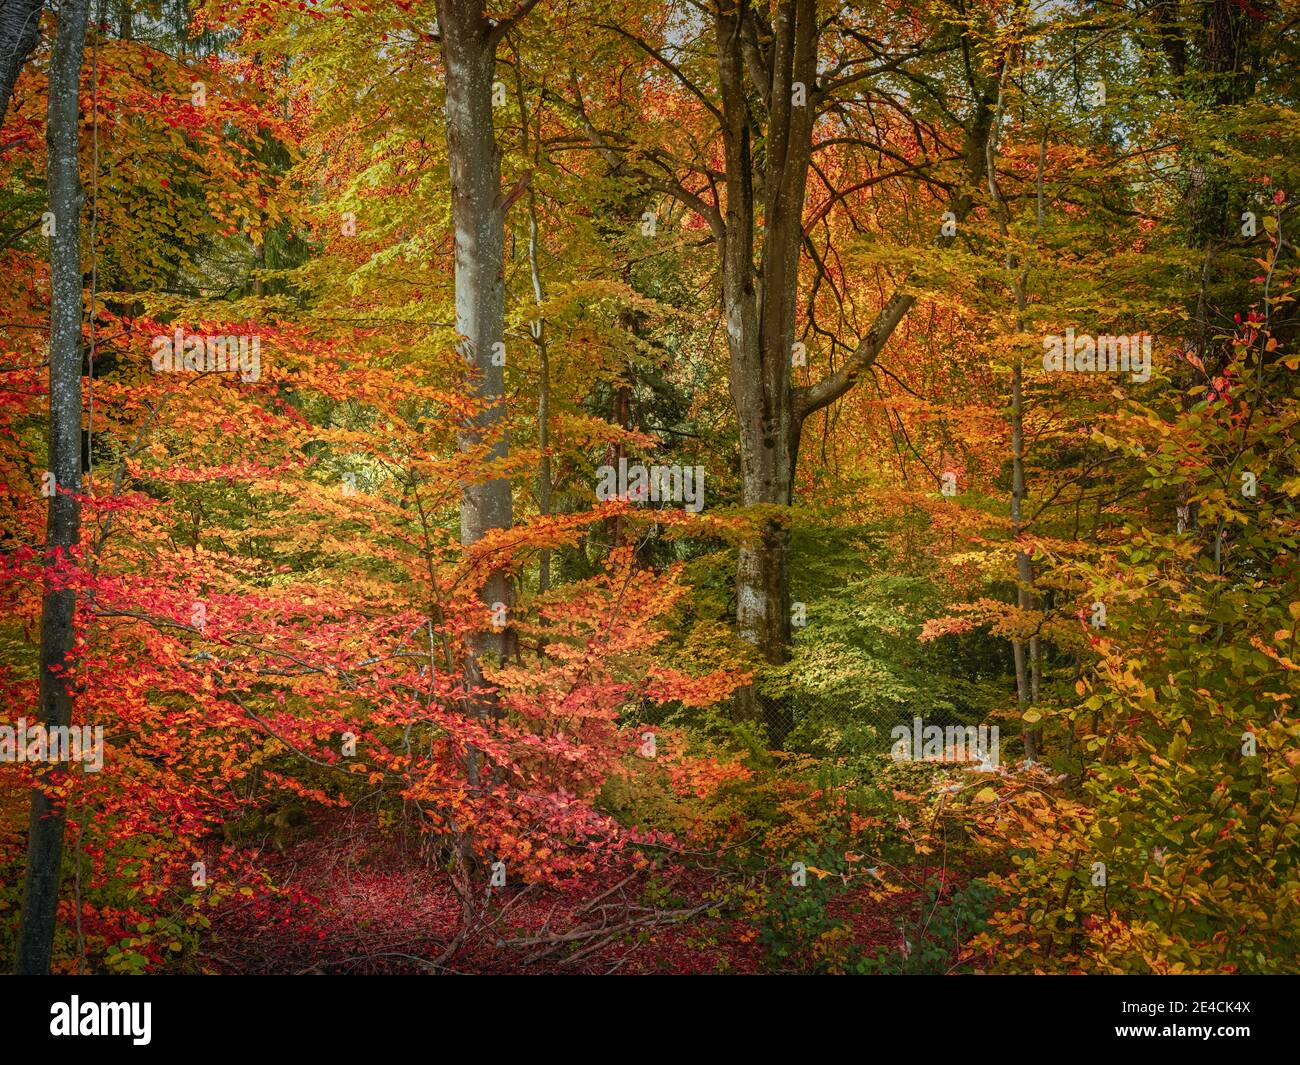 Colorful mixed forest in autumn Stock Photo